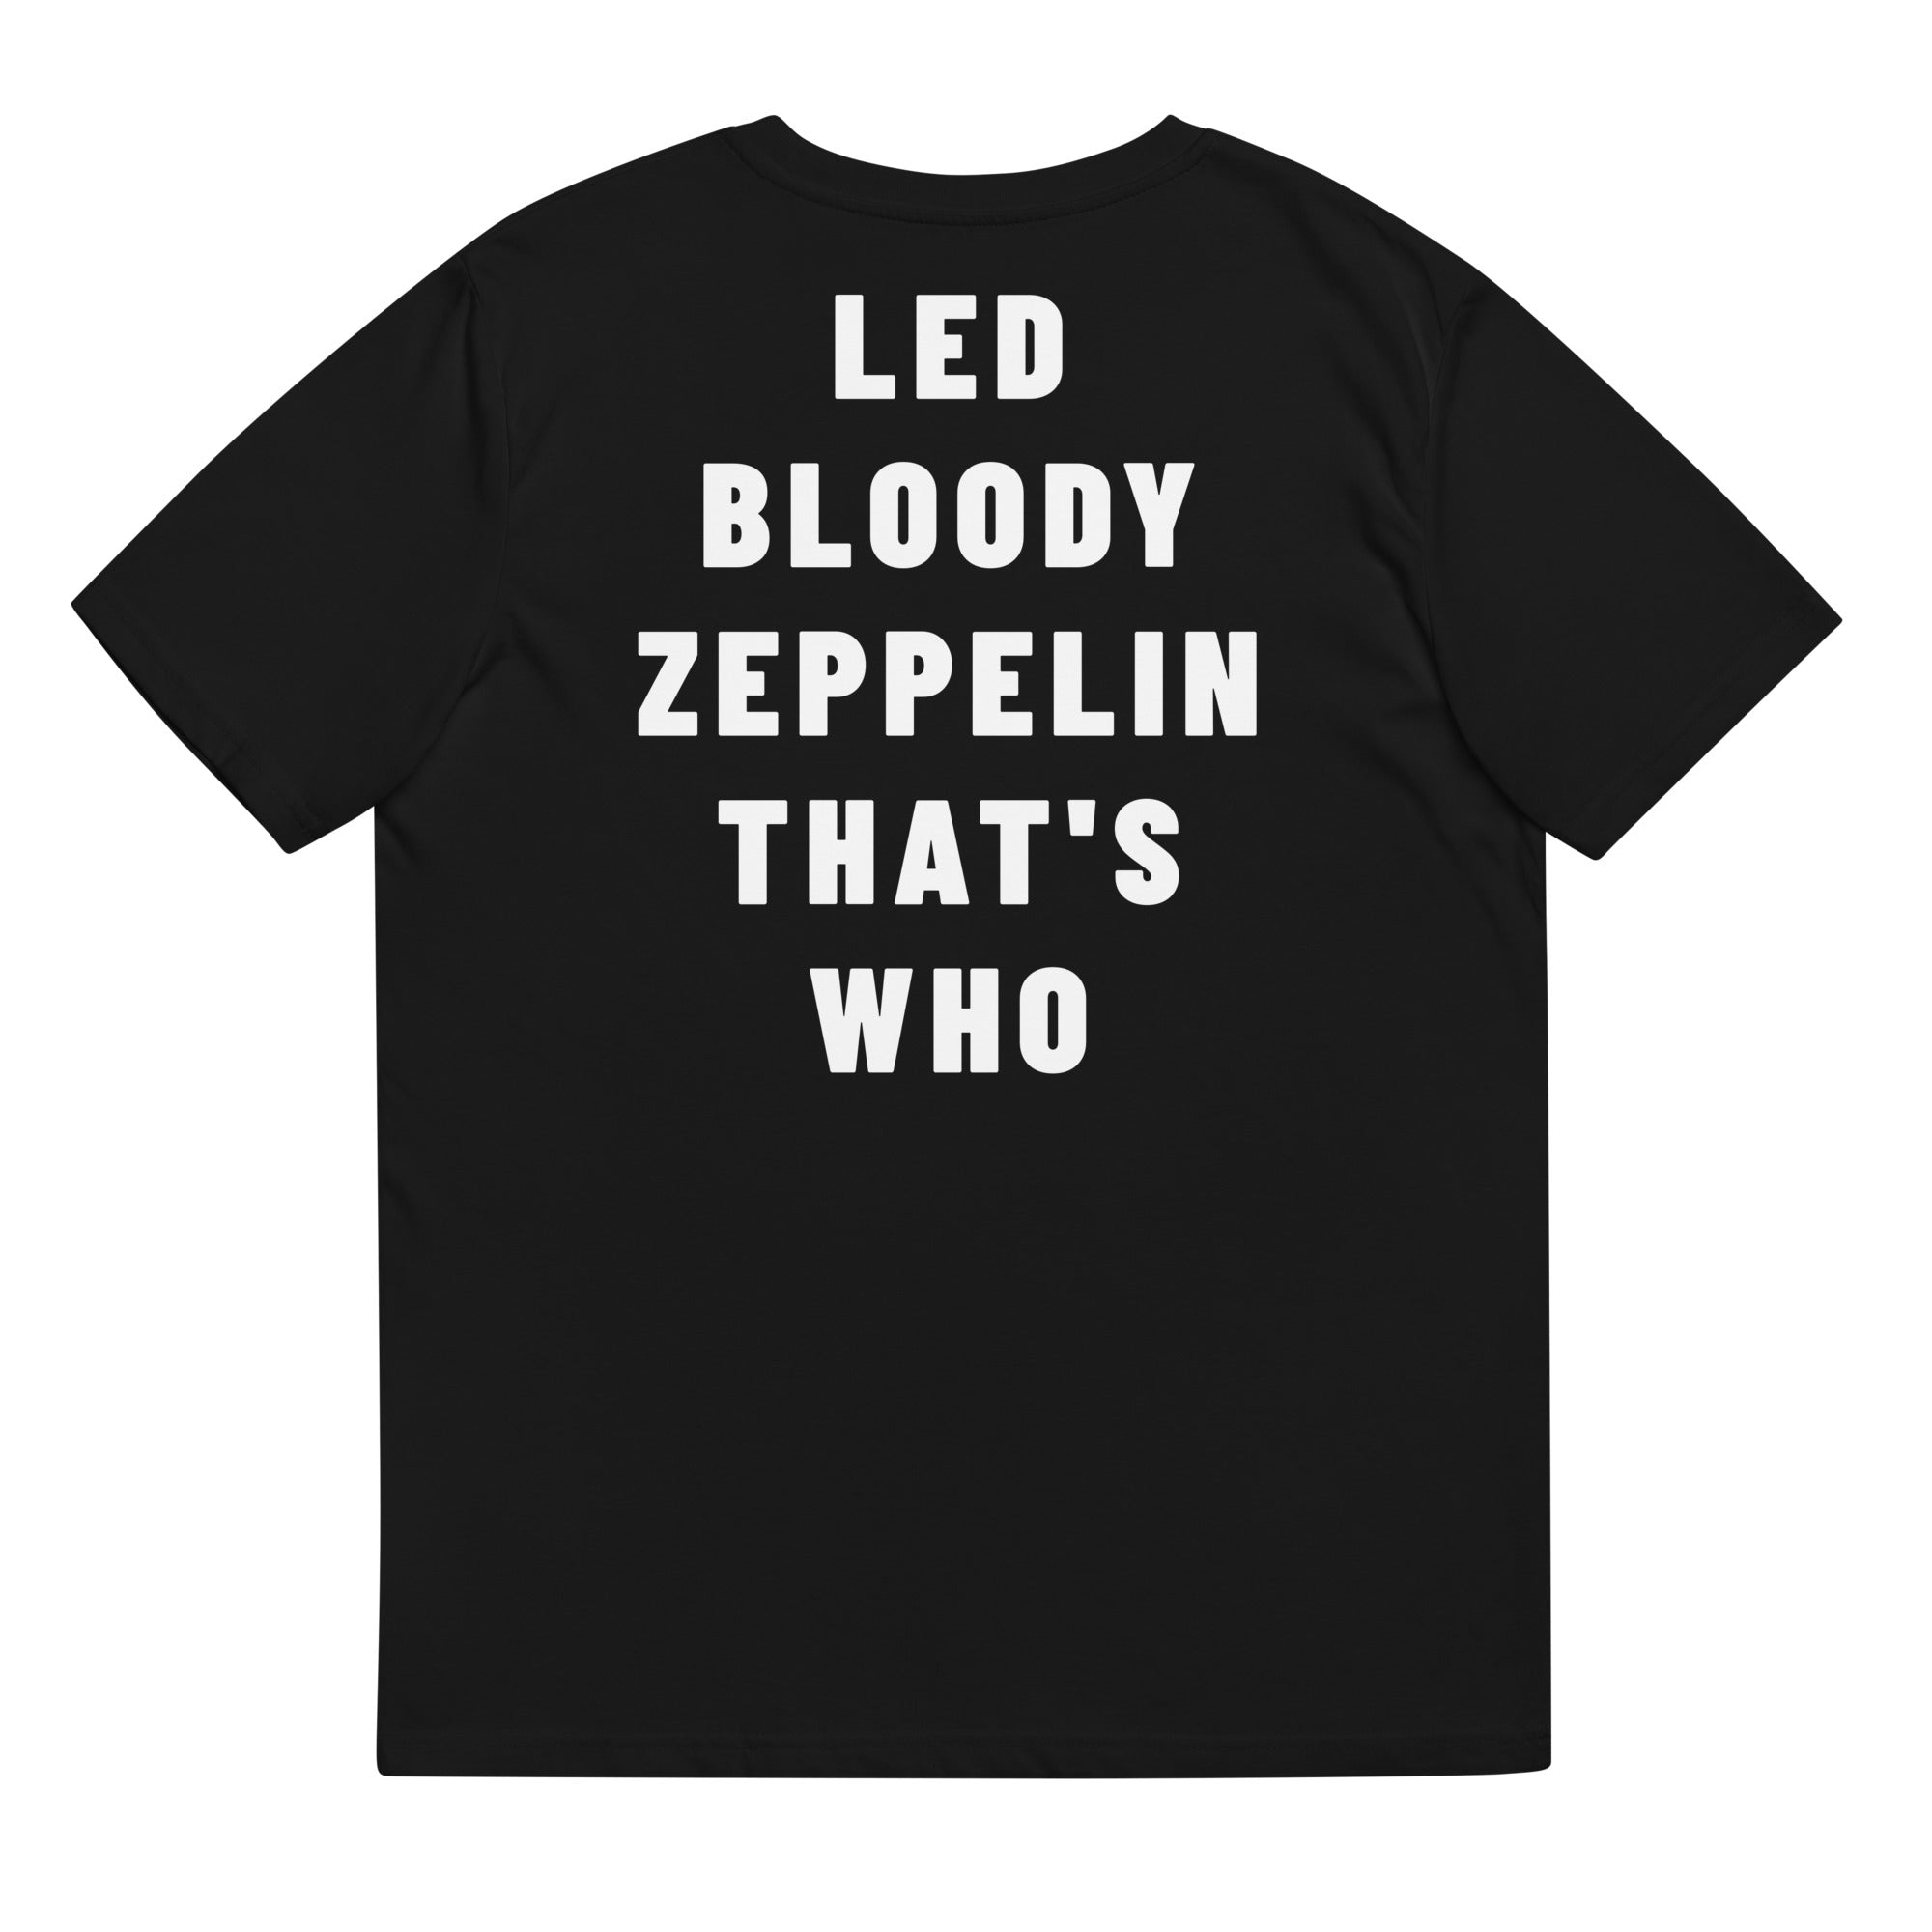 LED BLOODY ZEPPELIN THAT'S WHO Printed Unisex Organic Cotton T-shirt (black)